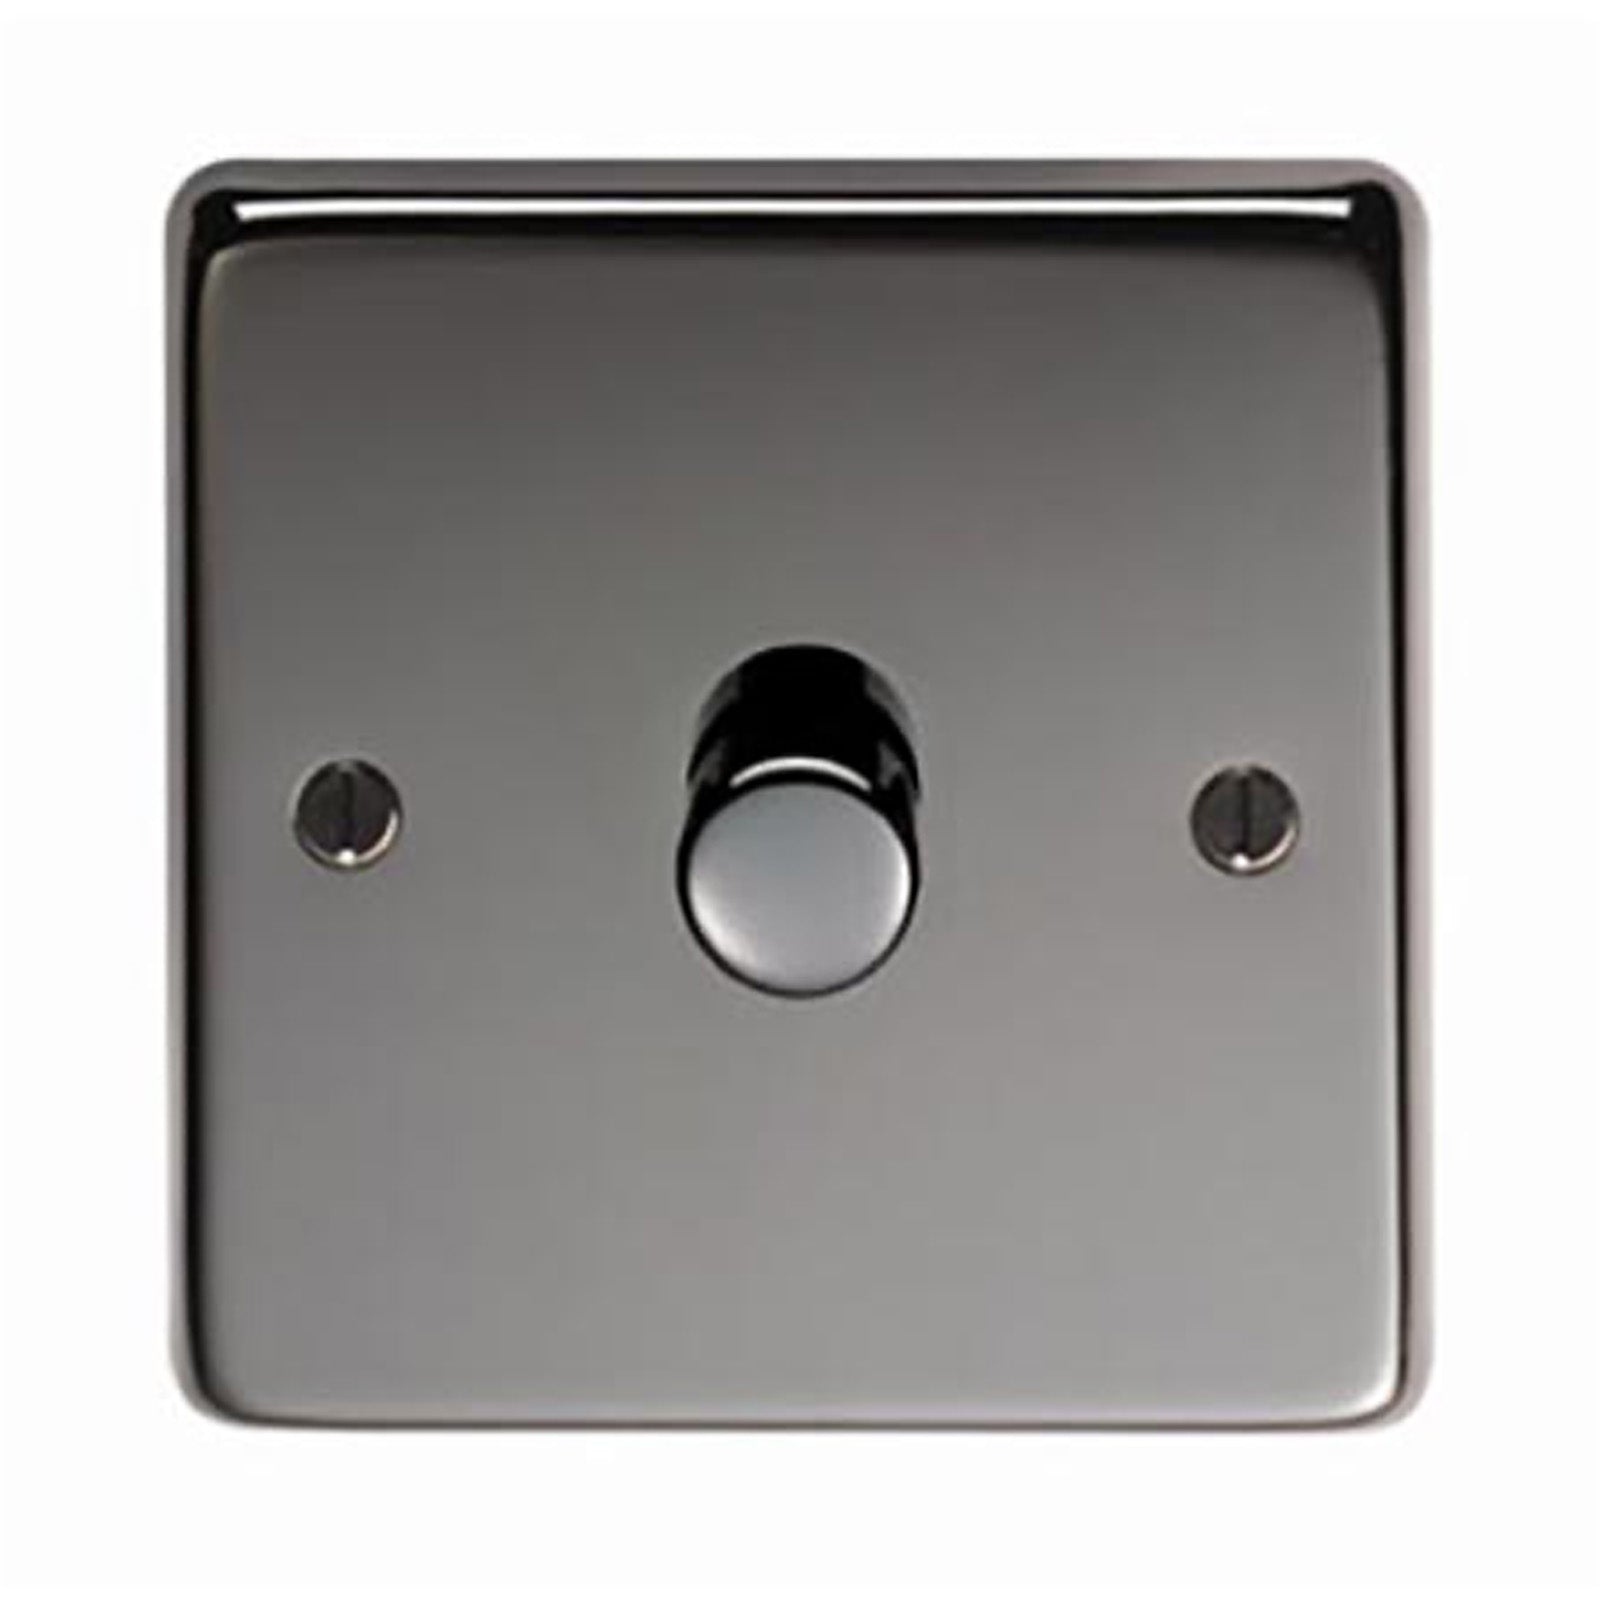 SHOW Image of Single LED Dimmer Switch with Black Nickel finish